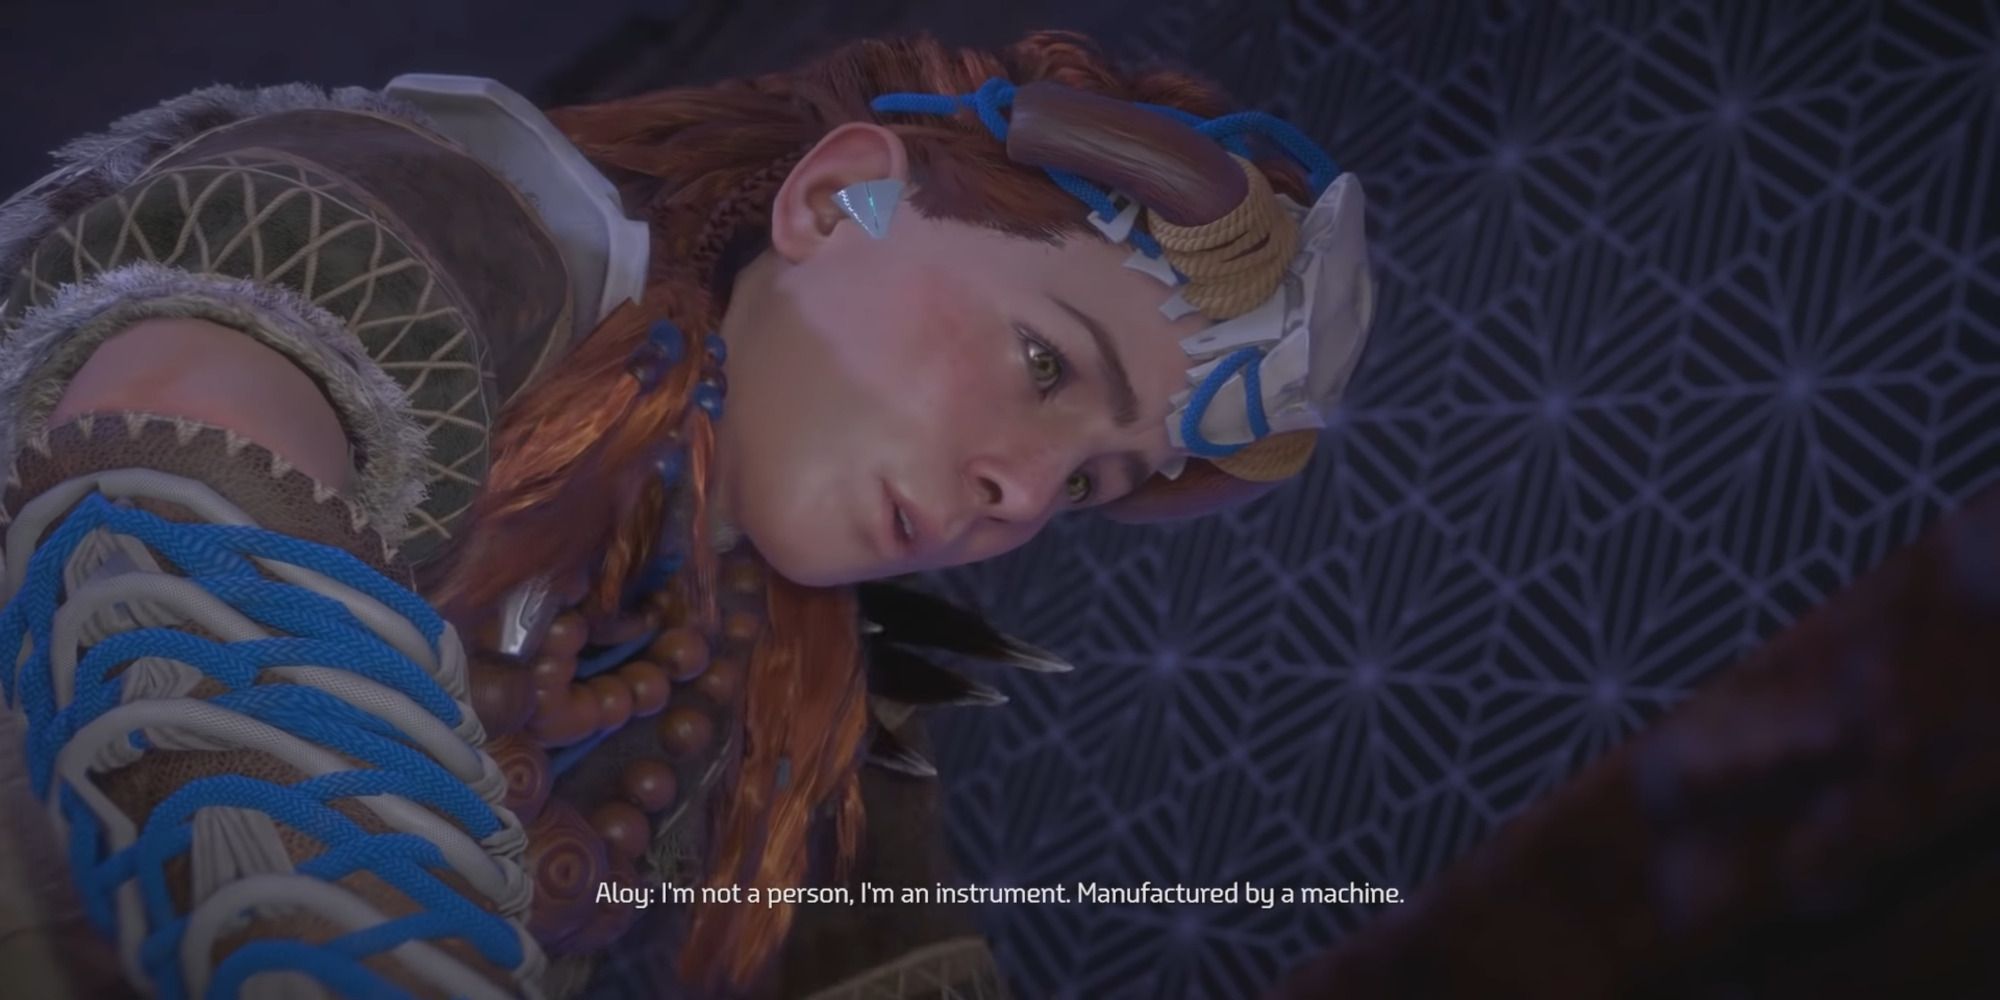 Aloy learning about the truth of her origins from Horizon: Zero Dawn